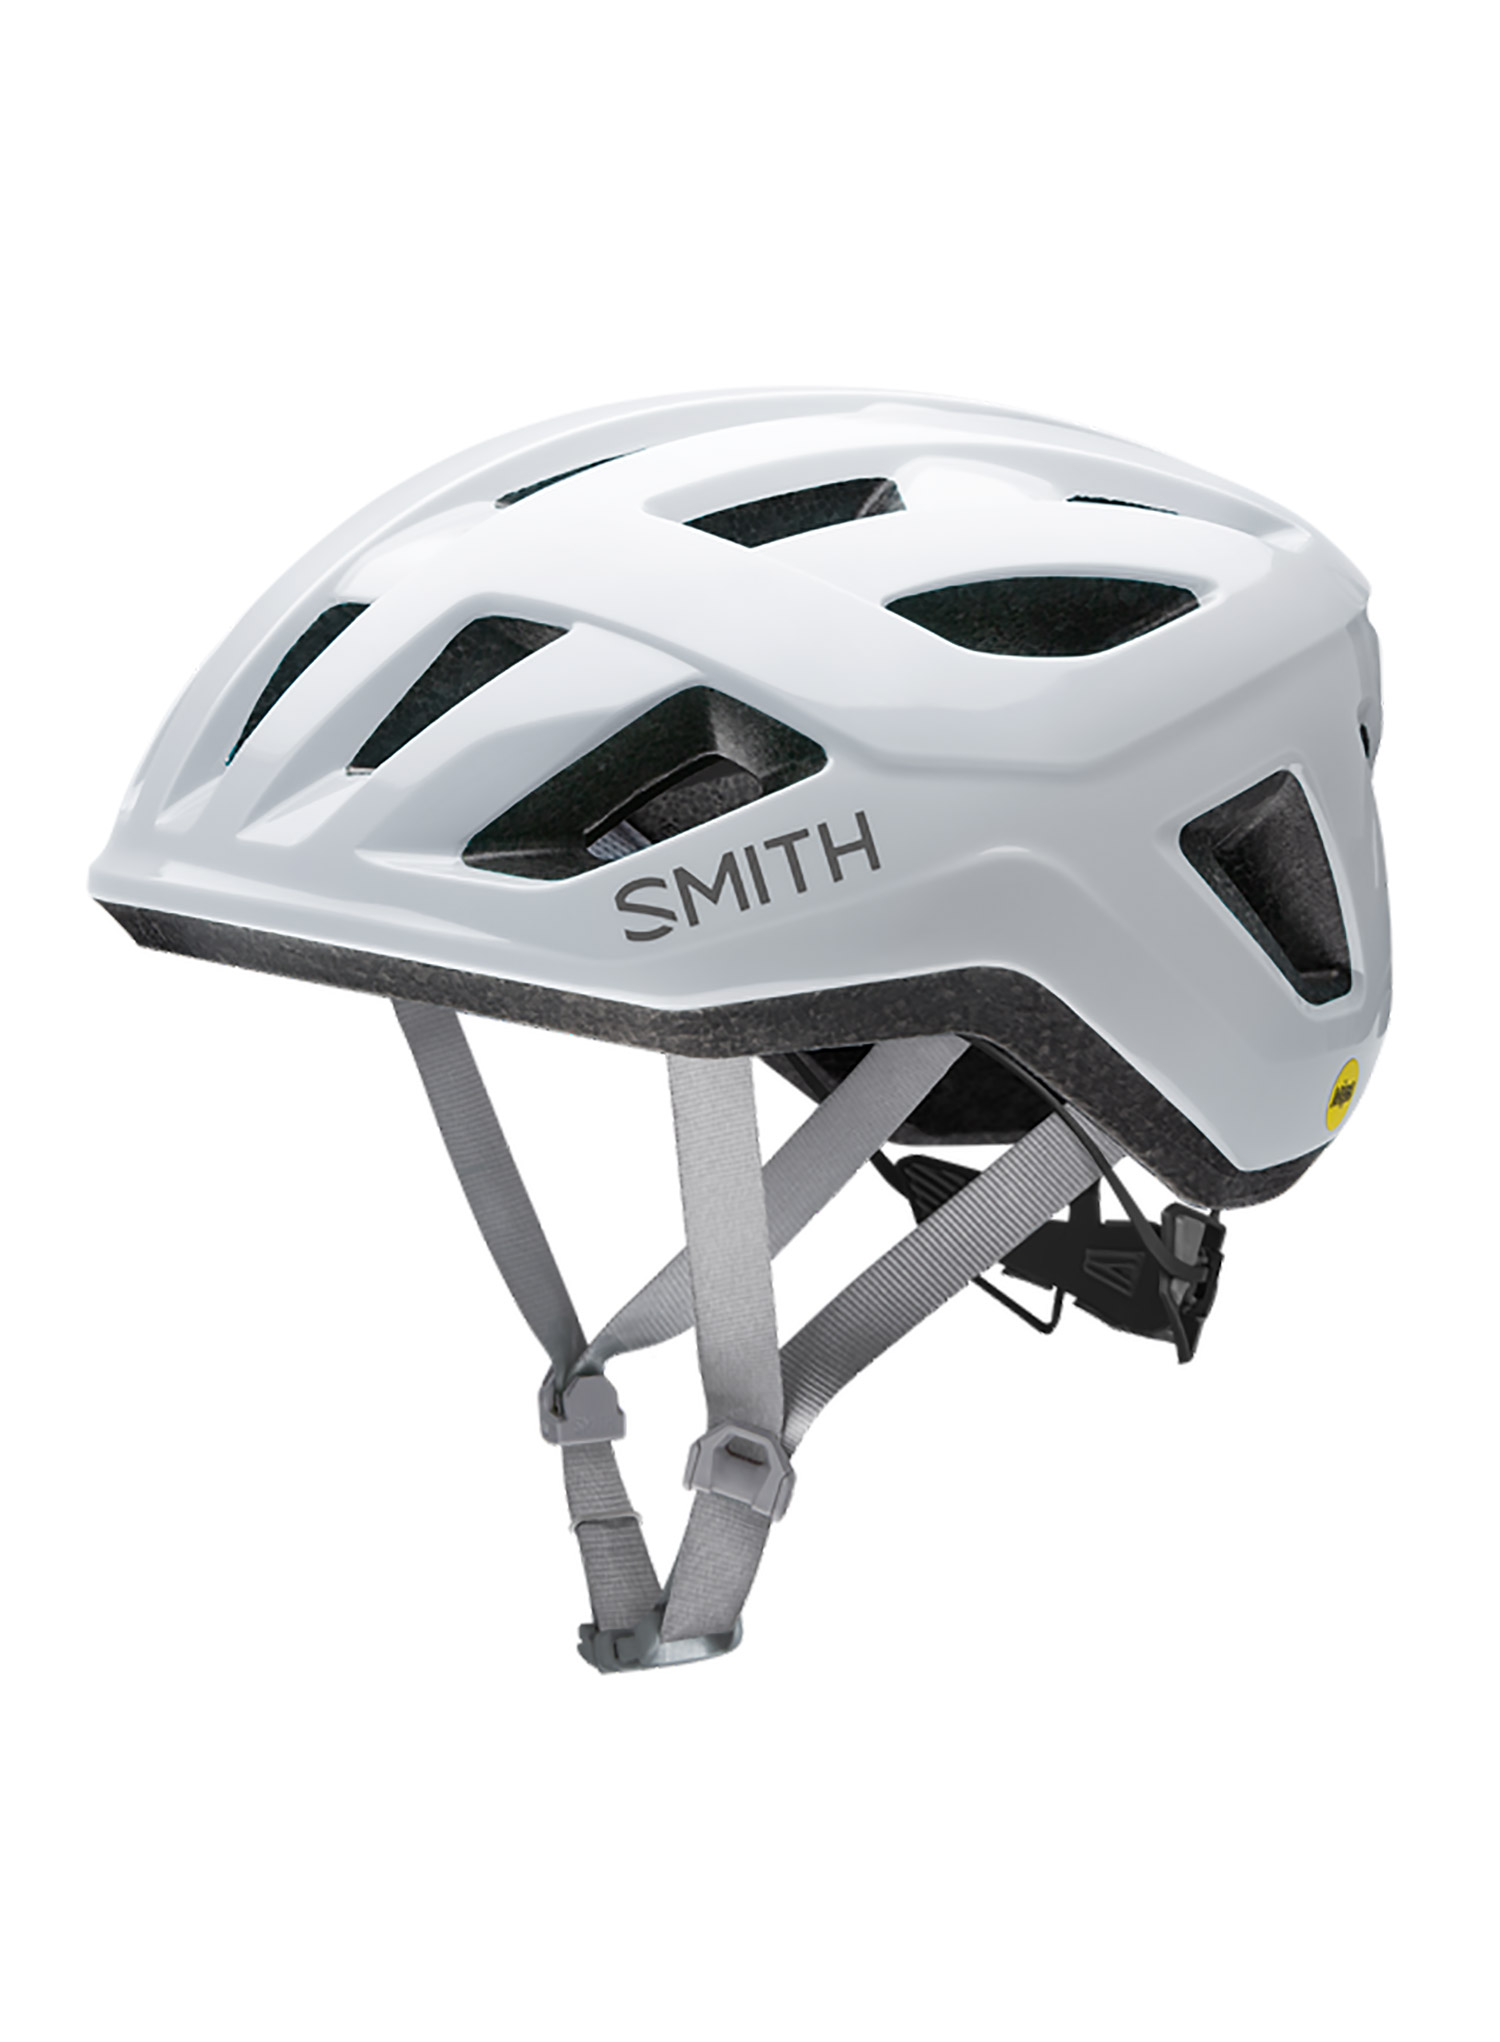 SMITH SIGNAL MIPS WHITE KASK ROWEROWY R. M (55-59 CM) <is>